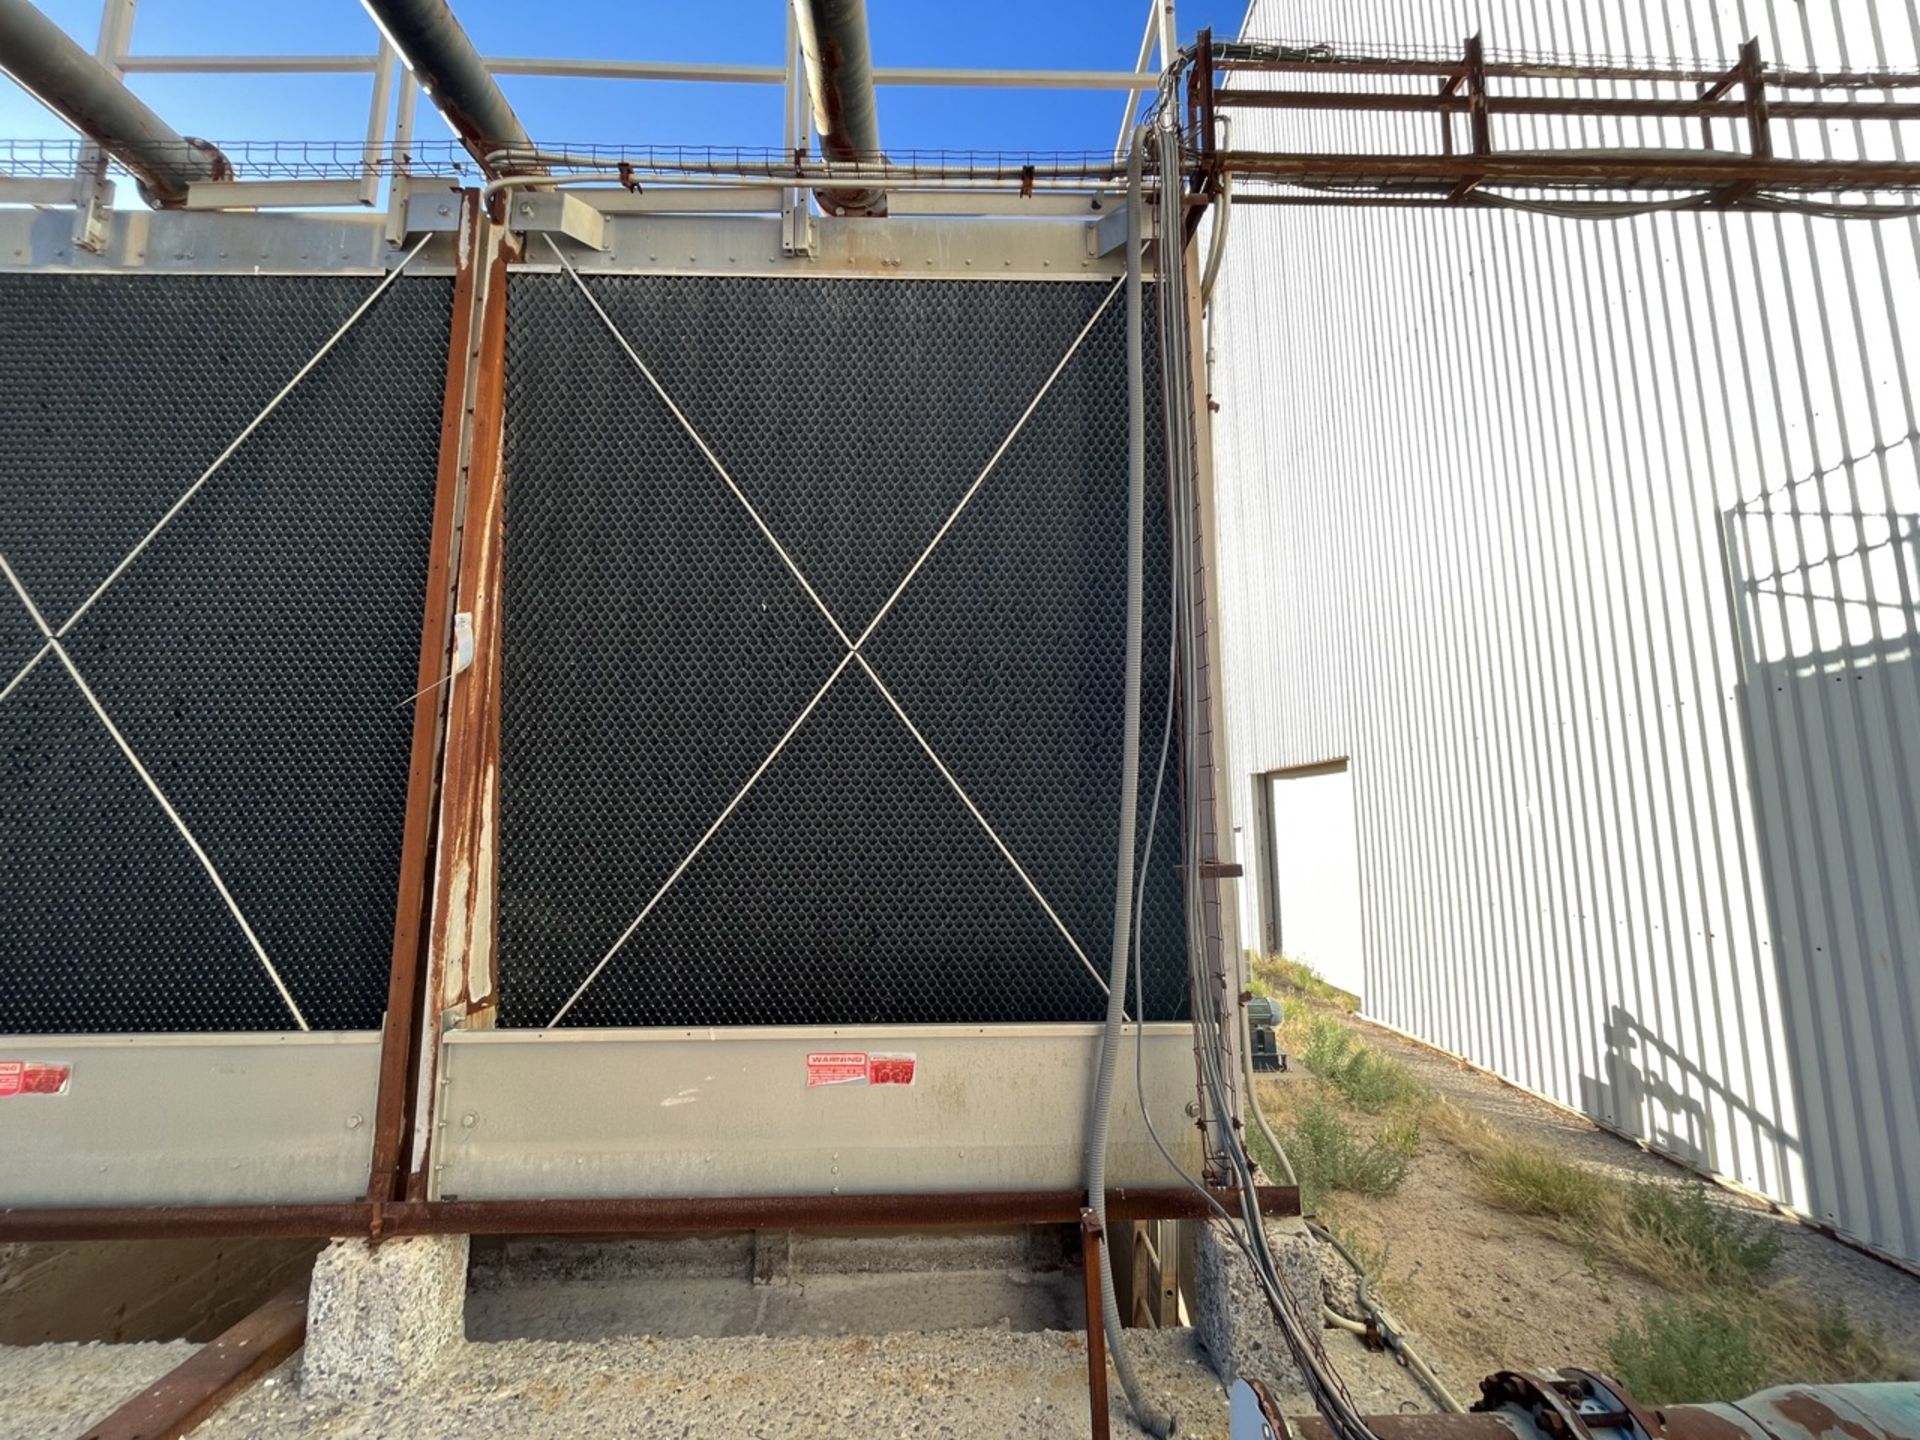 SPX Marley Cooling Tower, Model NC8403TAN2BGF, Series 10090866-A2-NC8403BG-14, Year 2009; 1 cell 25 - Image 8 of 23